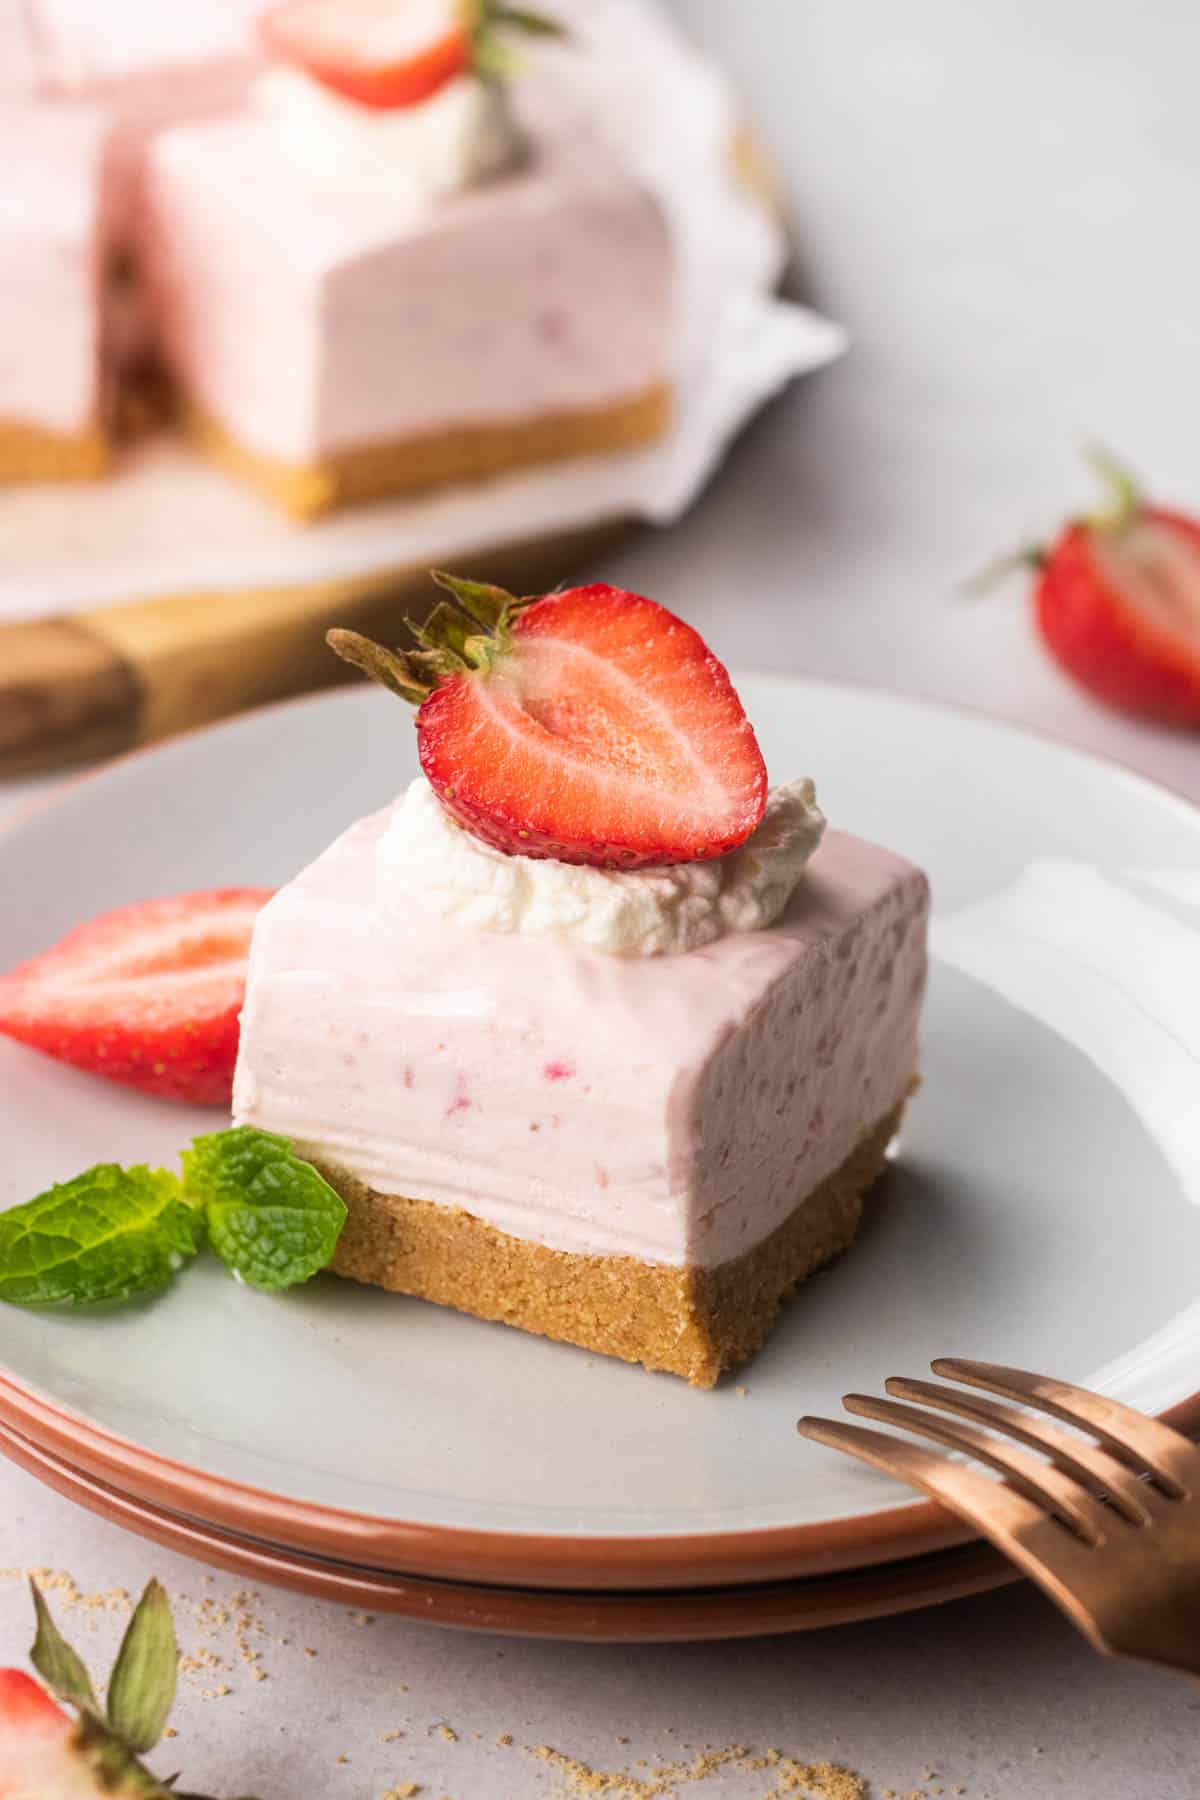 Strawberry cheesecake bar, topped with whipped cream and a strawberry.